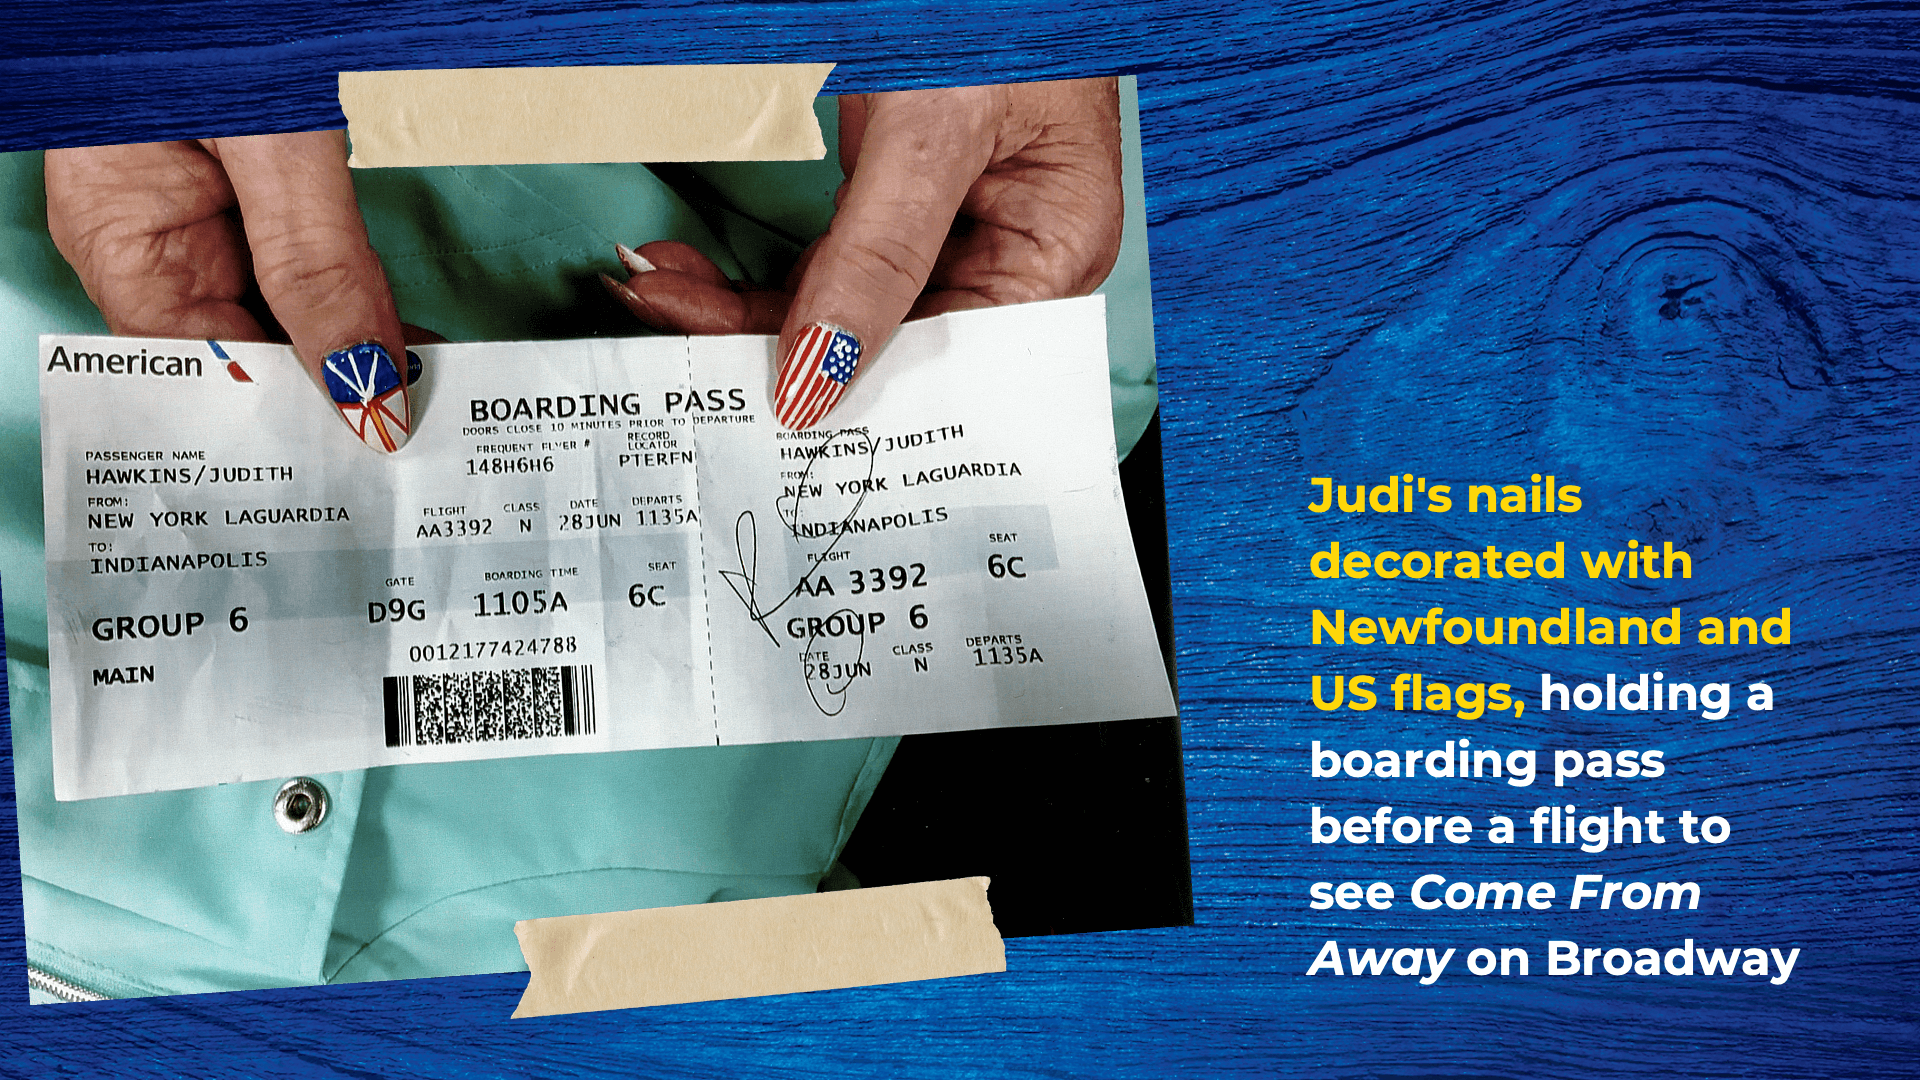 Judi's nails decorated with Newfoundland and US flags, holding a boarding pass before a flight to see Come From Away on Broadway